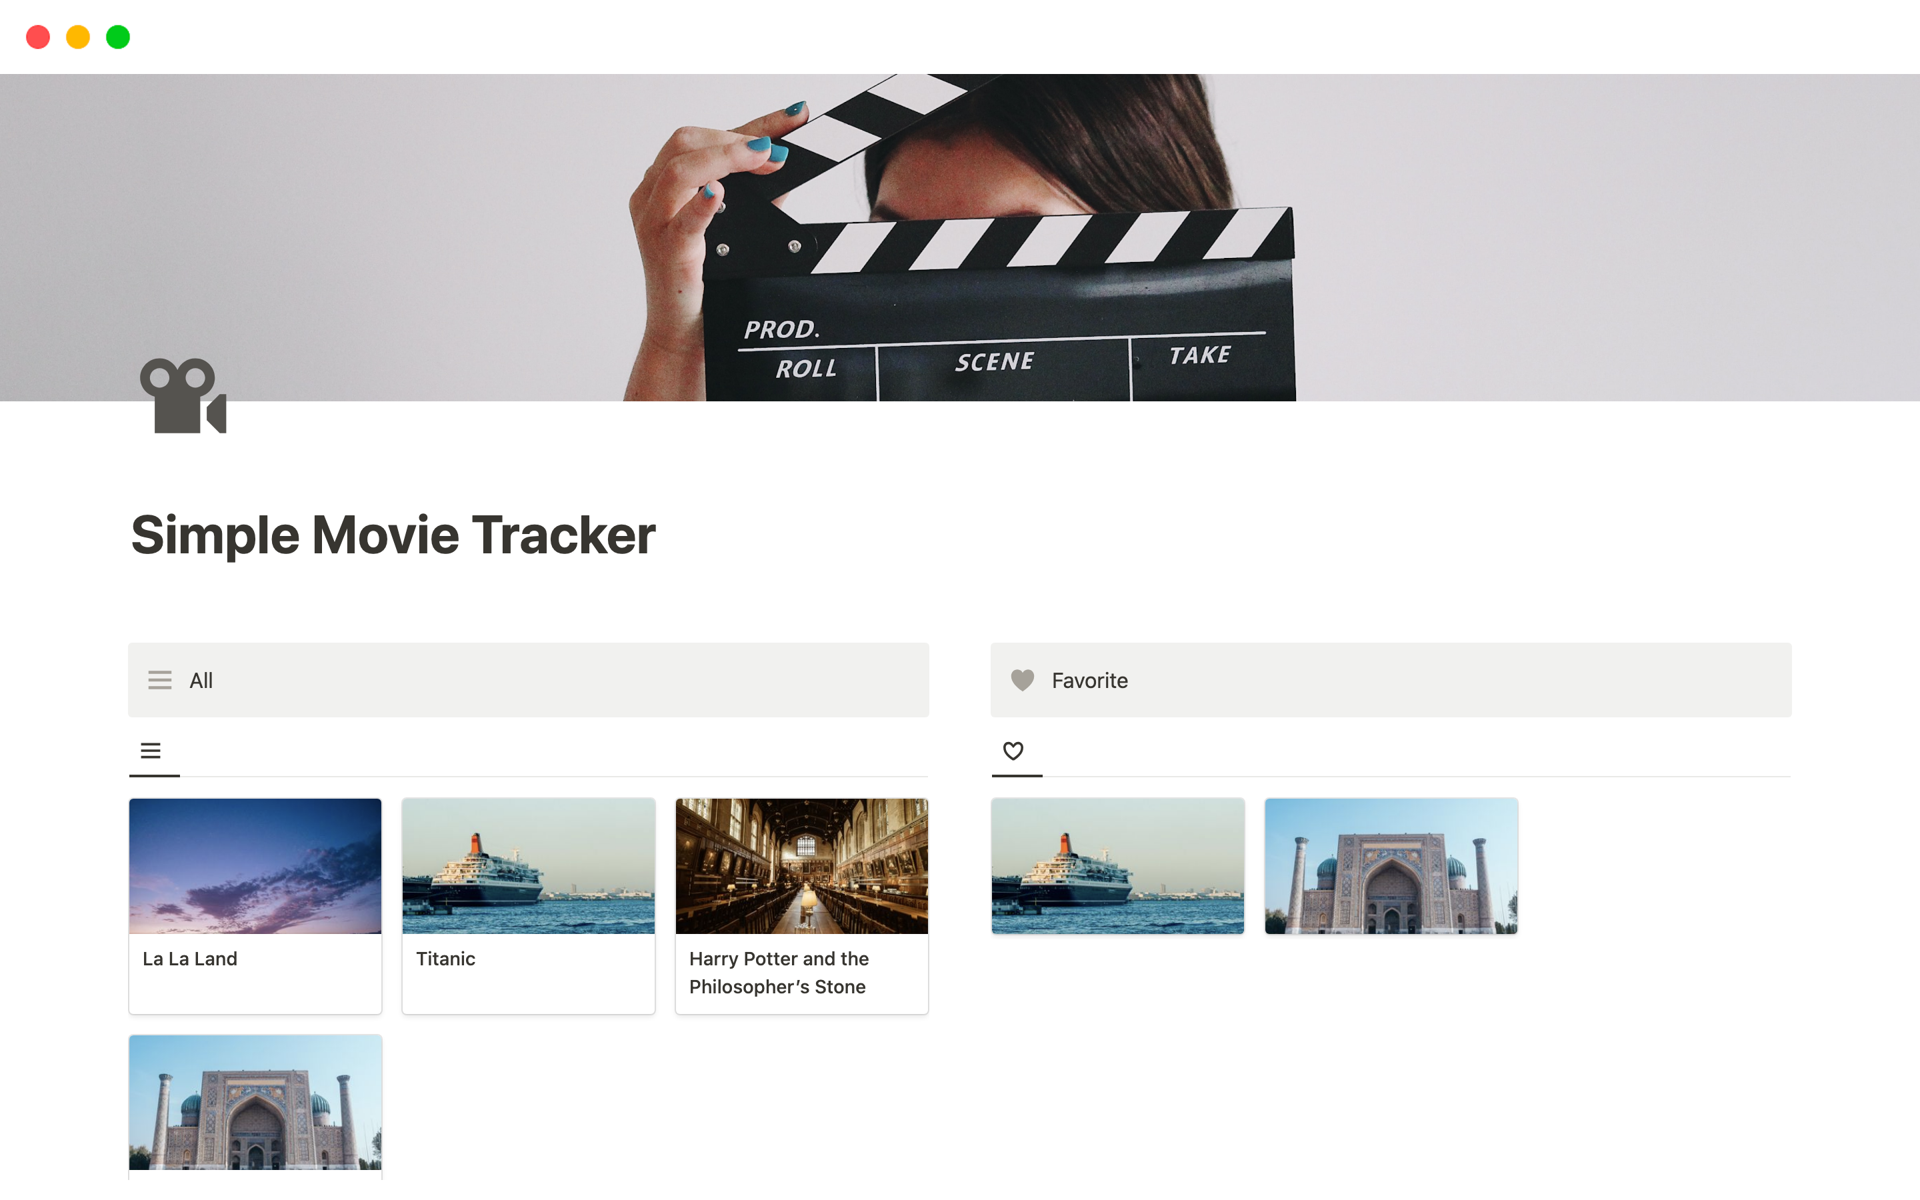 Simple tracking record for movies.
